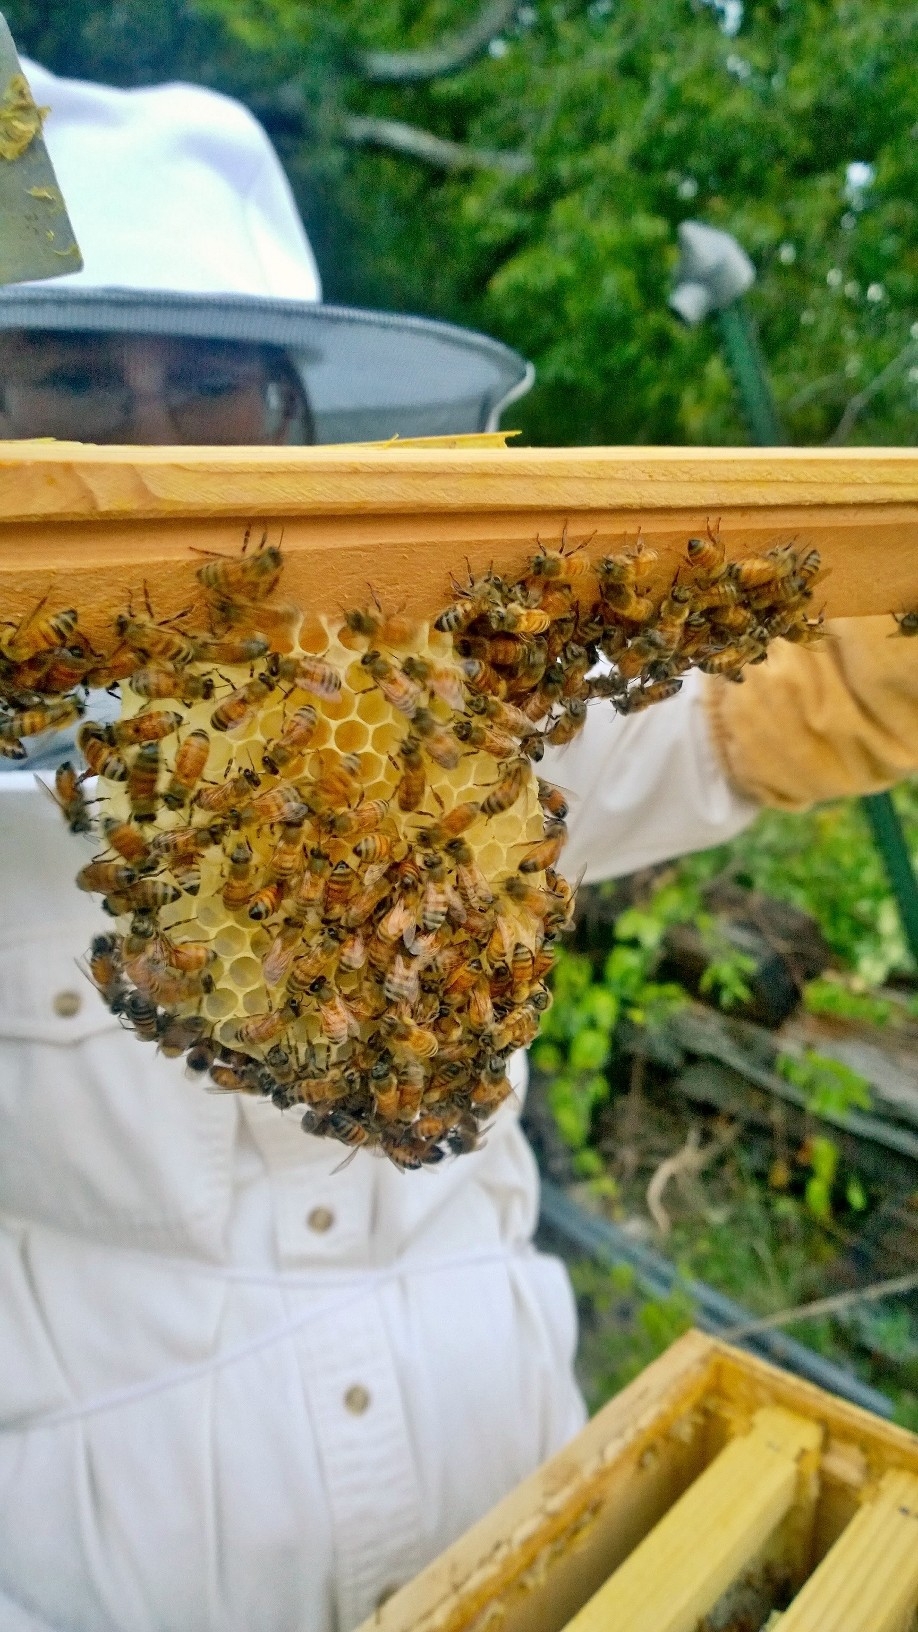 Splitting the Bee Hive! The New Bee Adventure Continued!